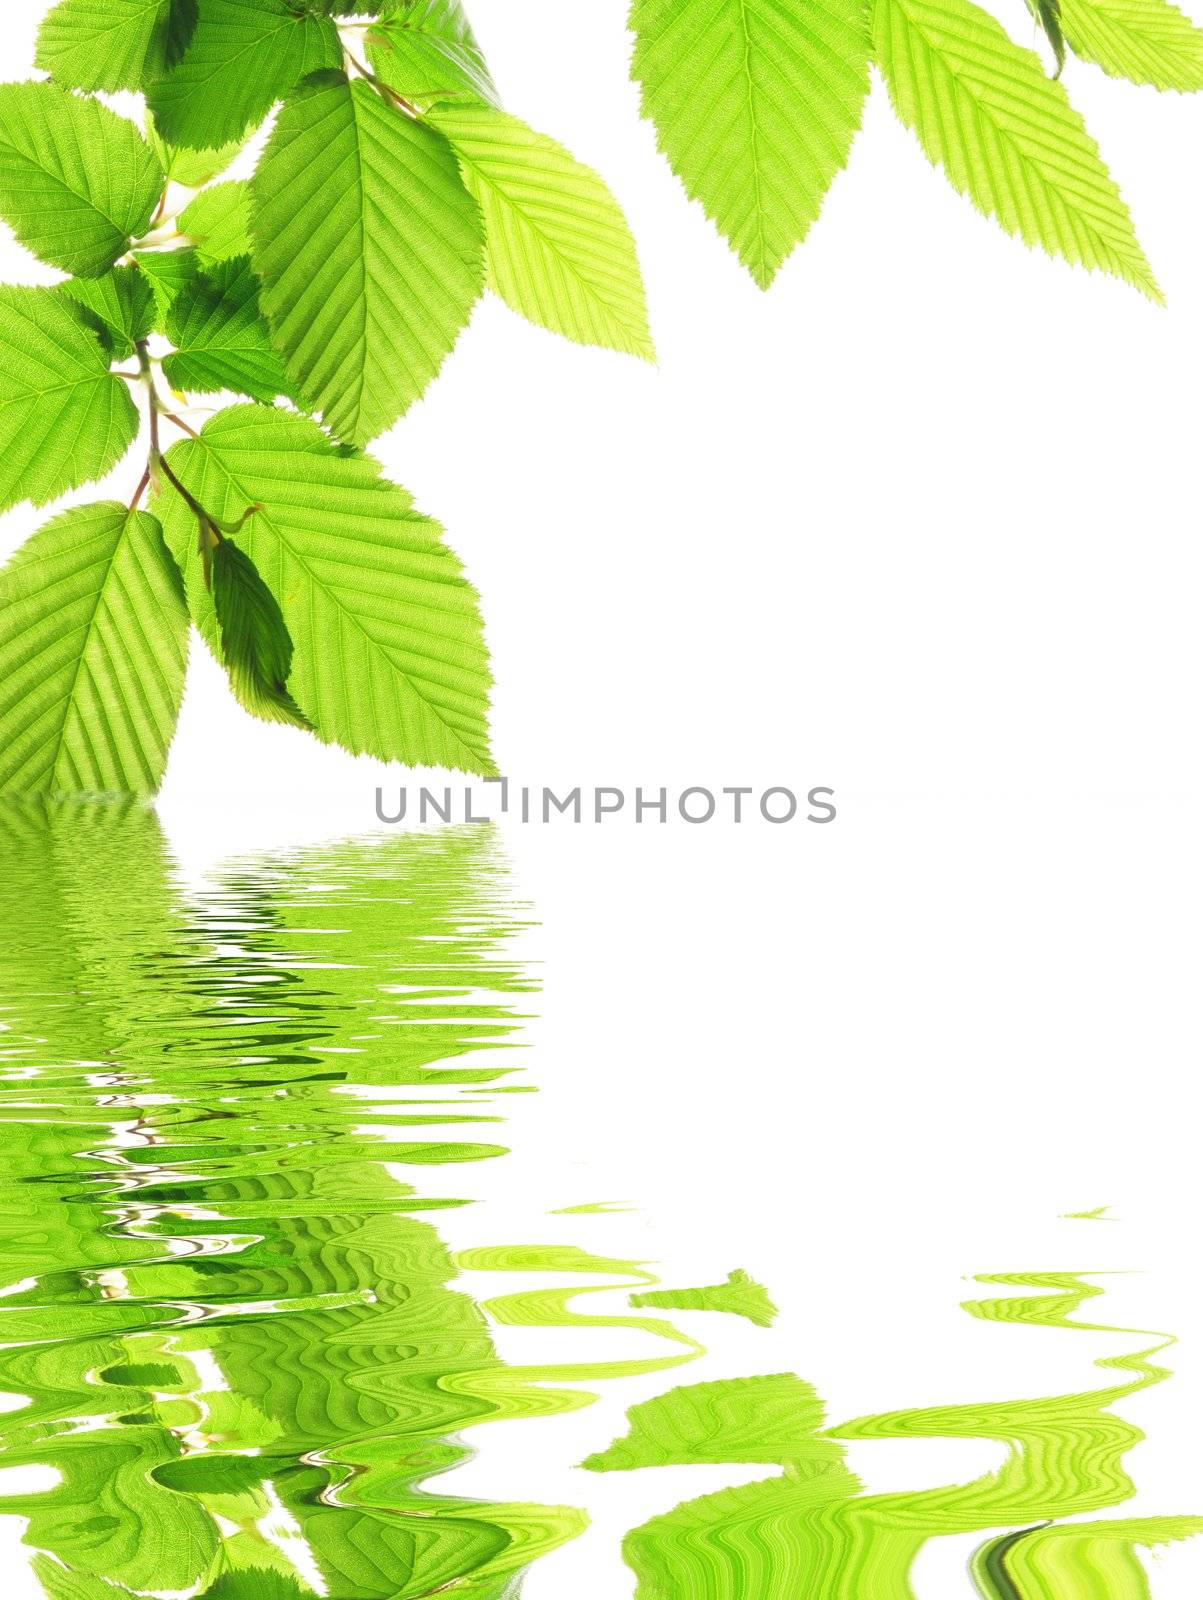 green leave and water by gunnar3000